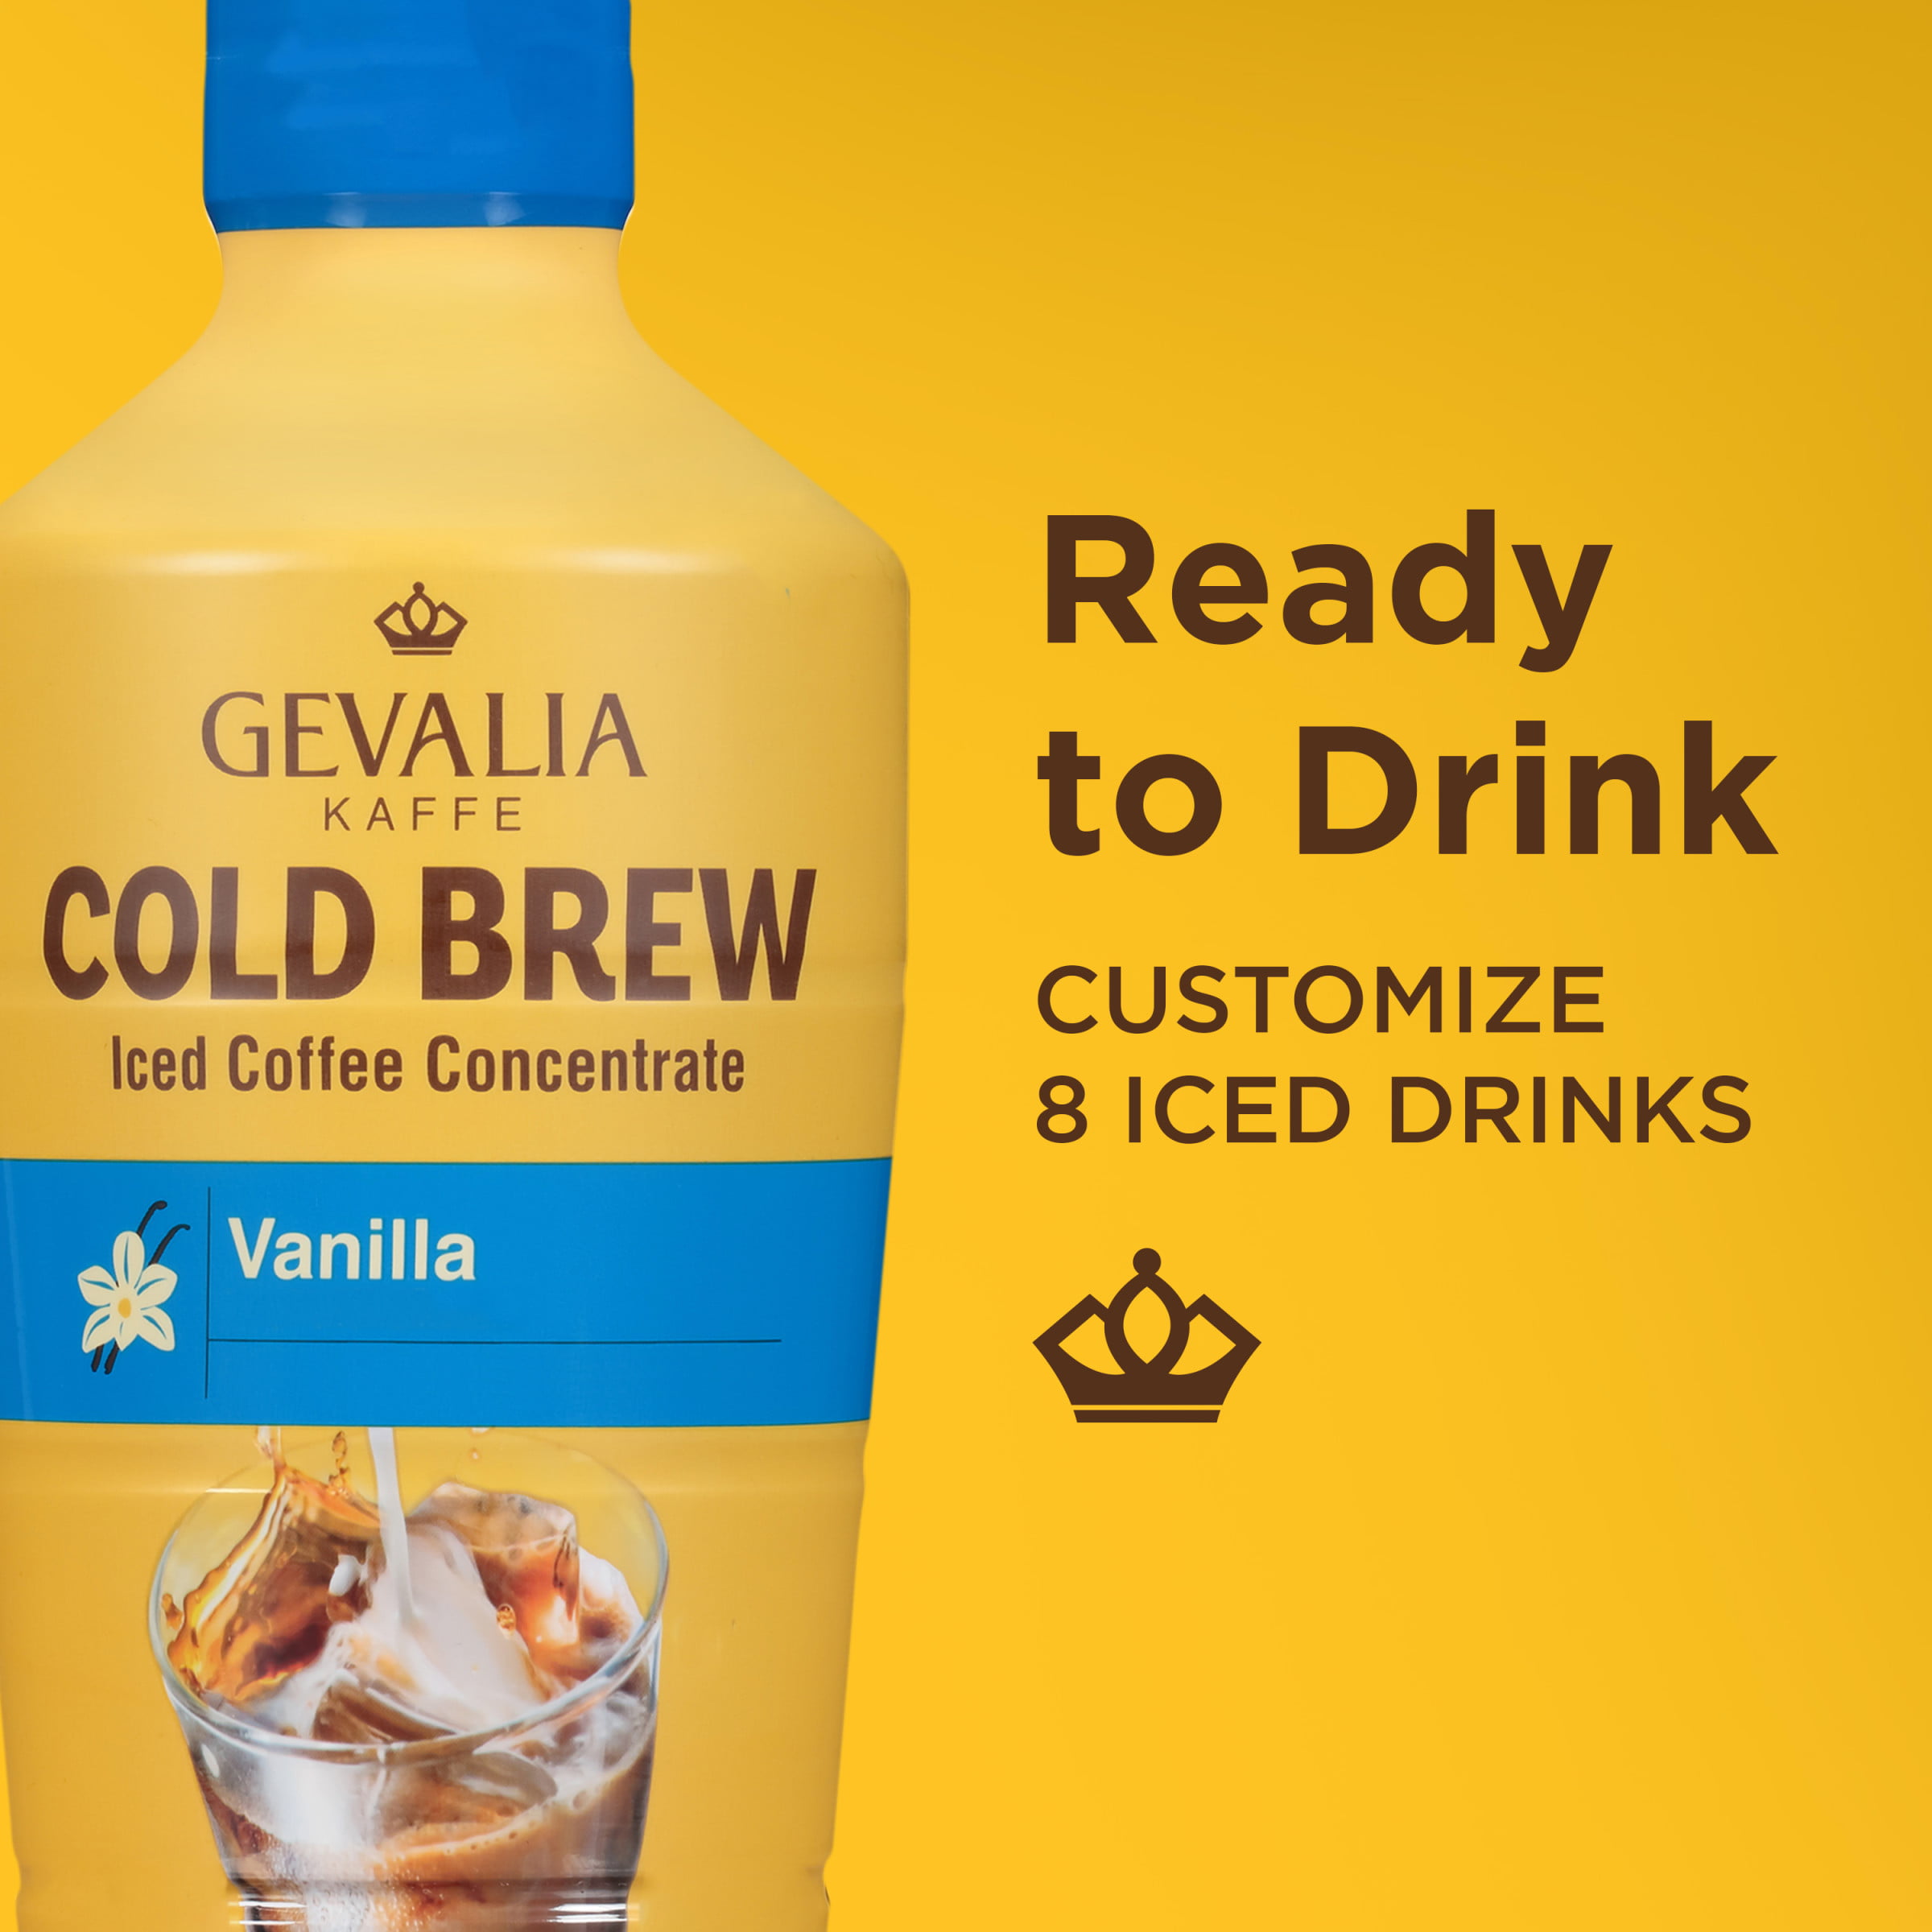 Cool Brew Coffee Concentrate, Vanilla, Iced Coffee